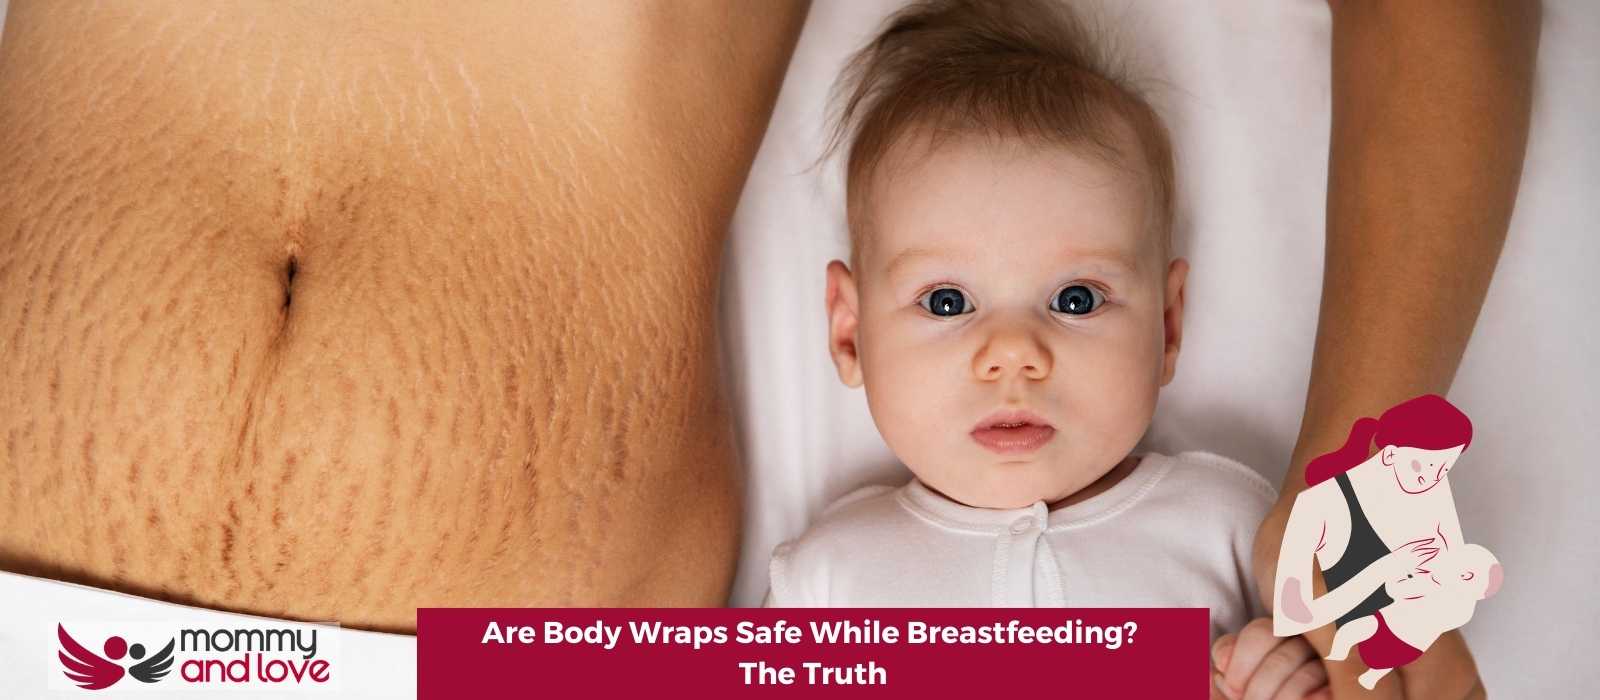 Are Body Wraps Safe While Breastfeeding The Truth